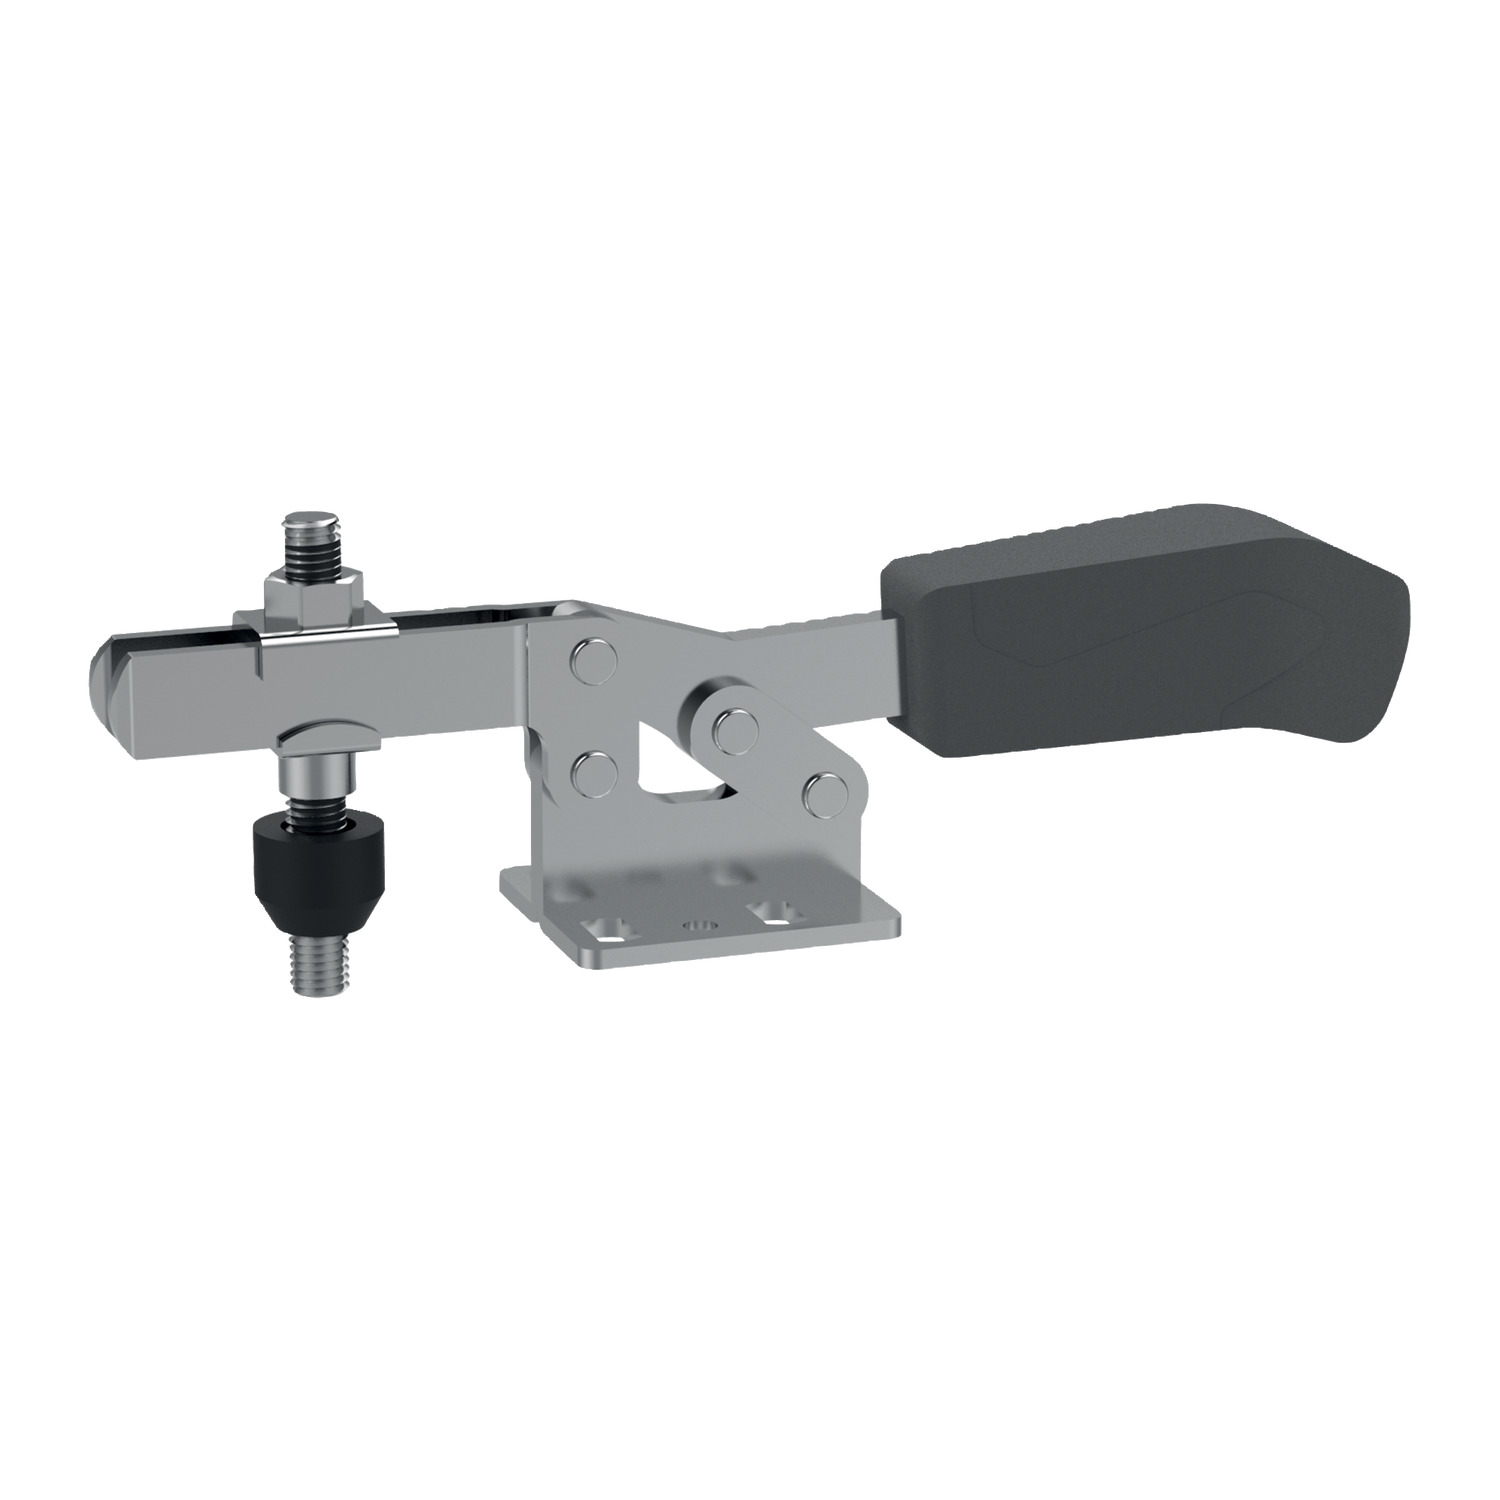 41000.3 Horizontal Acting Toggle Clamps